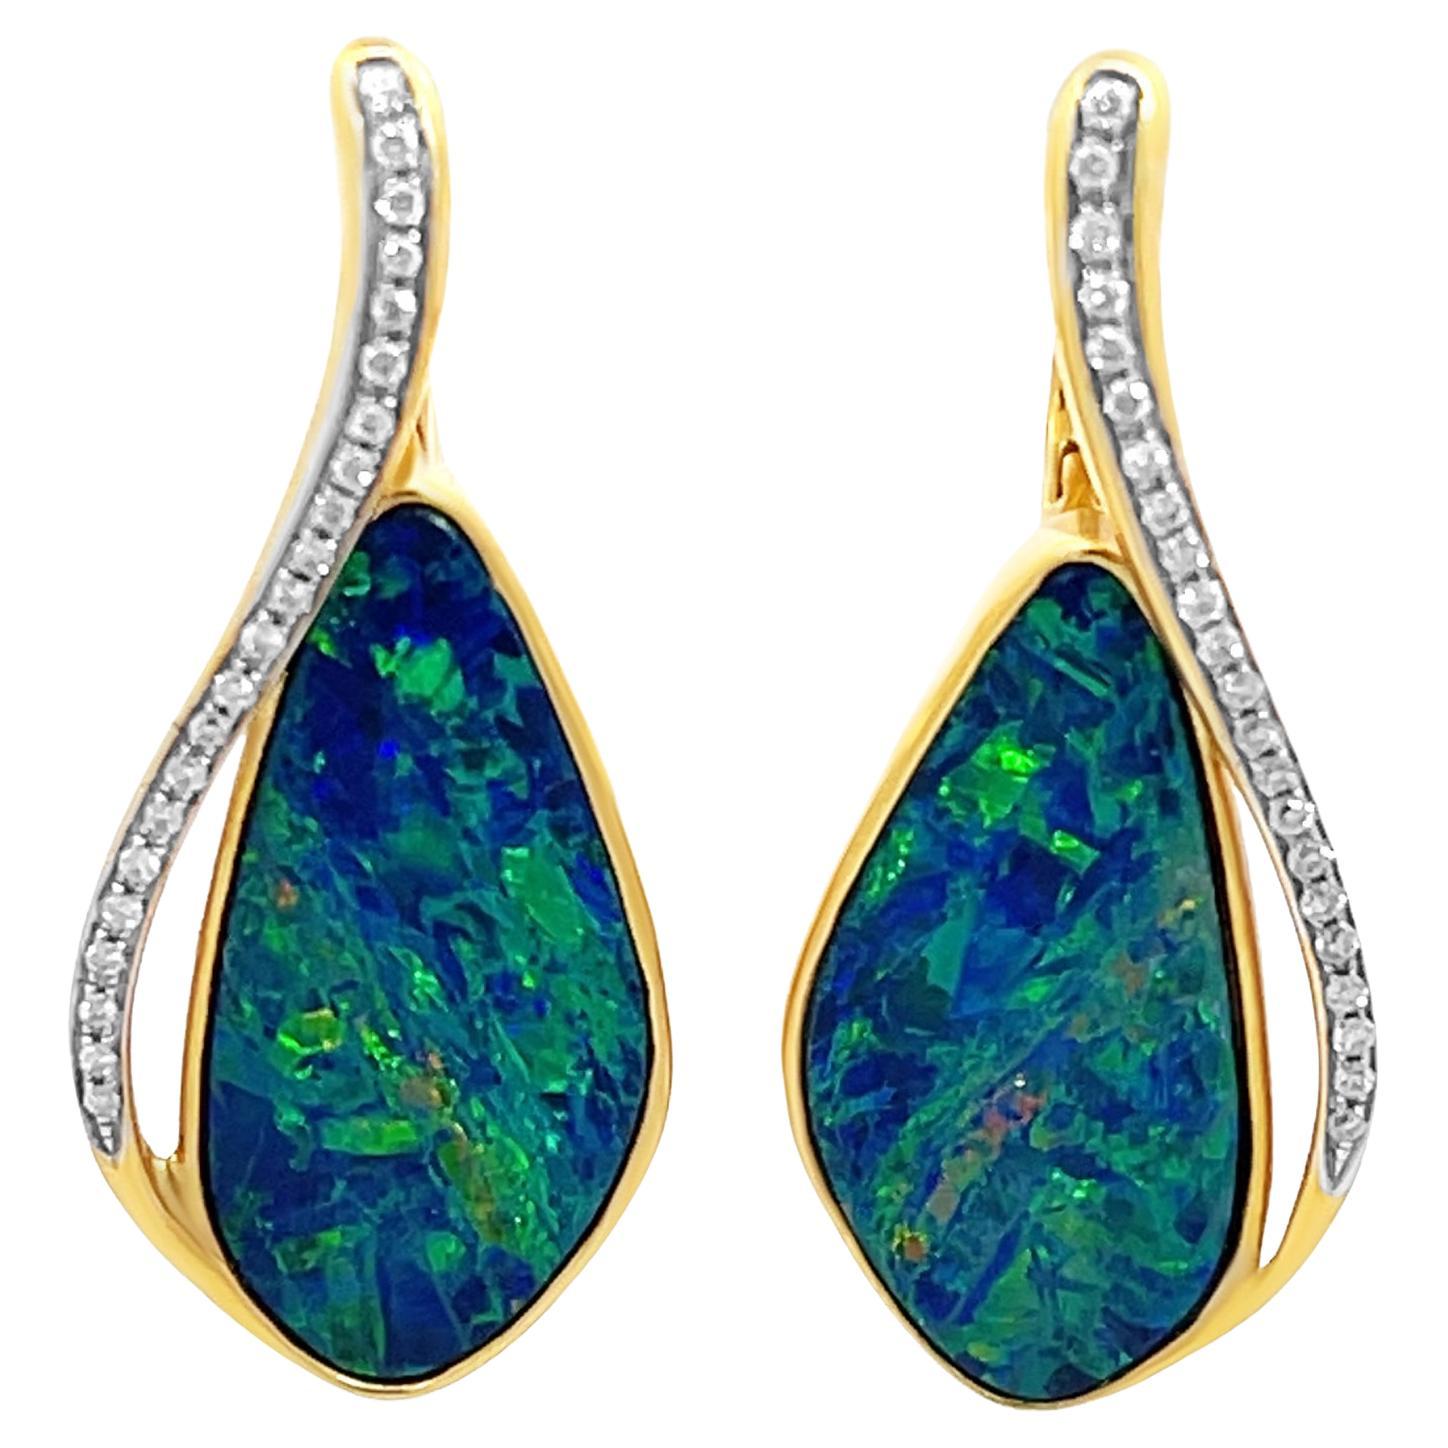 Premium Quality Australian 12.22ct Opal Doublet Earrings 18K Gold with Diamonds For Sale